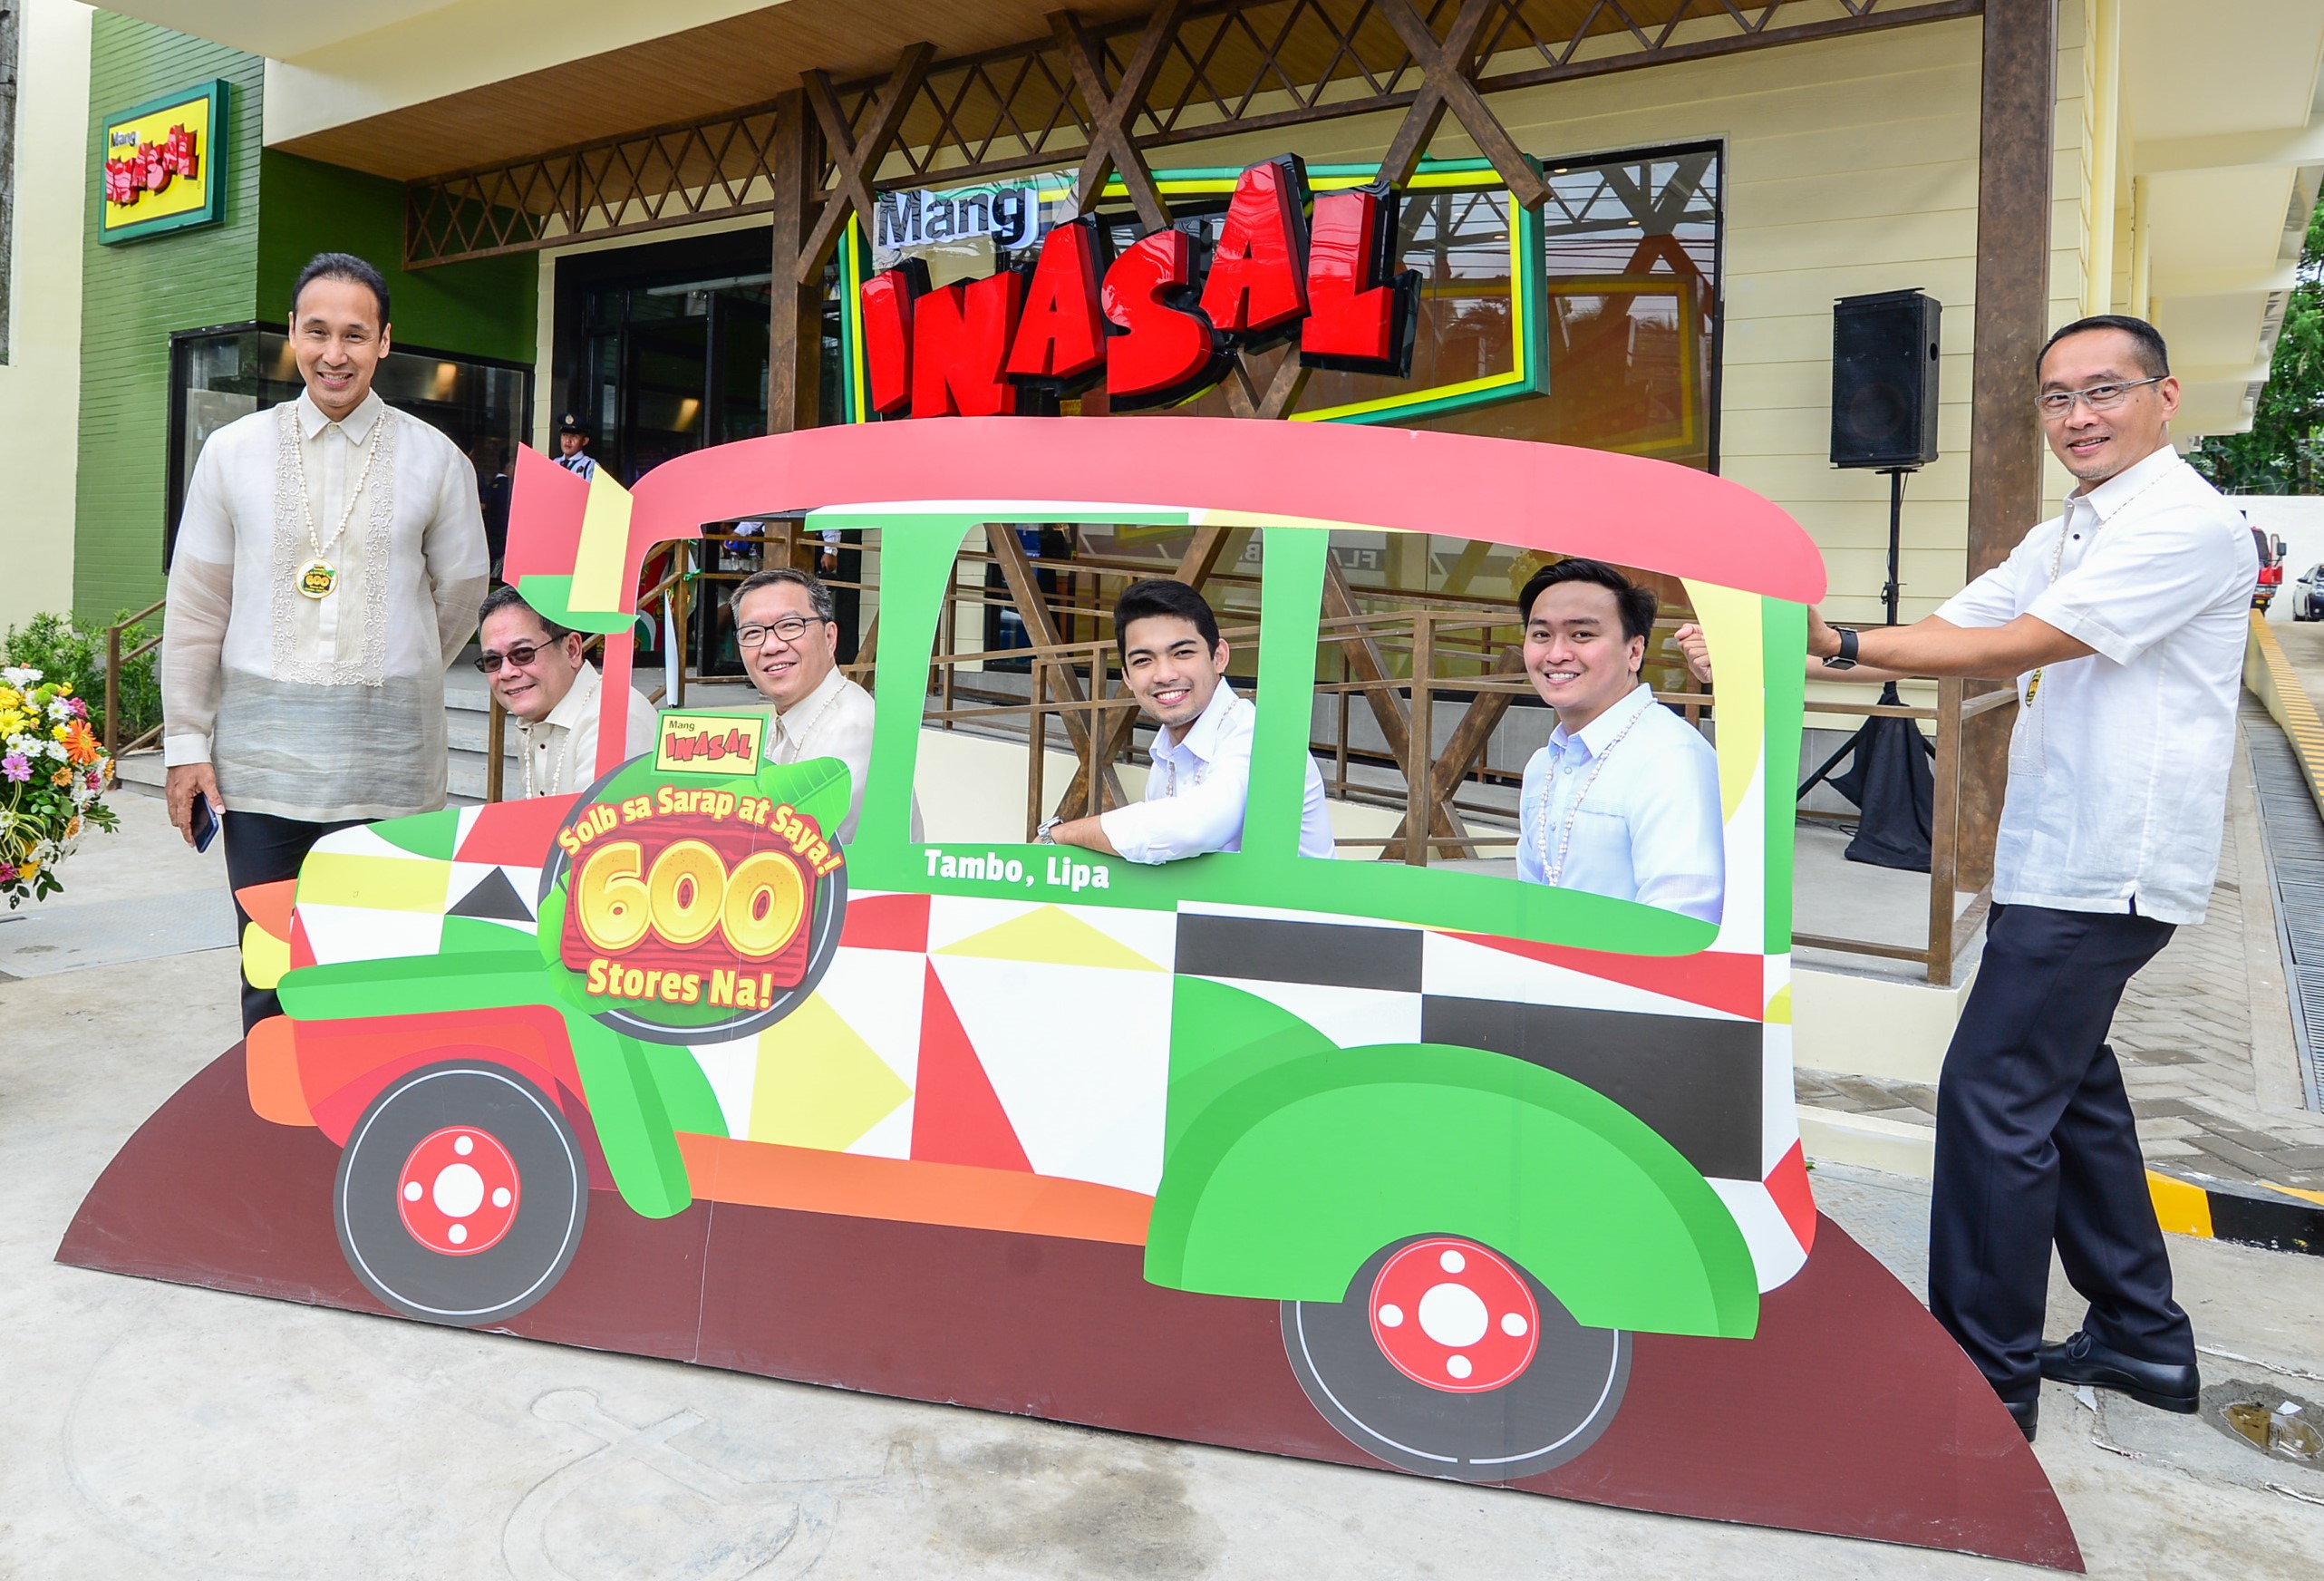 Lipa City Vice Mayor Mark Luancing (center) and Atty. Willy Rivera (second to the right) pose for a posterity shot at the Mang Inasal jeepney. They are joined by JFC Country Business Group Head for the Philippines Joseph Tanbuntiong (third from left), MI Business Unit Head Jojo Subido (second from left) and Franchisee Eric Reyes (left) and Managing Director Eugene Reyes. 